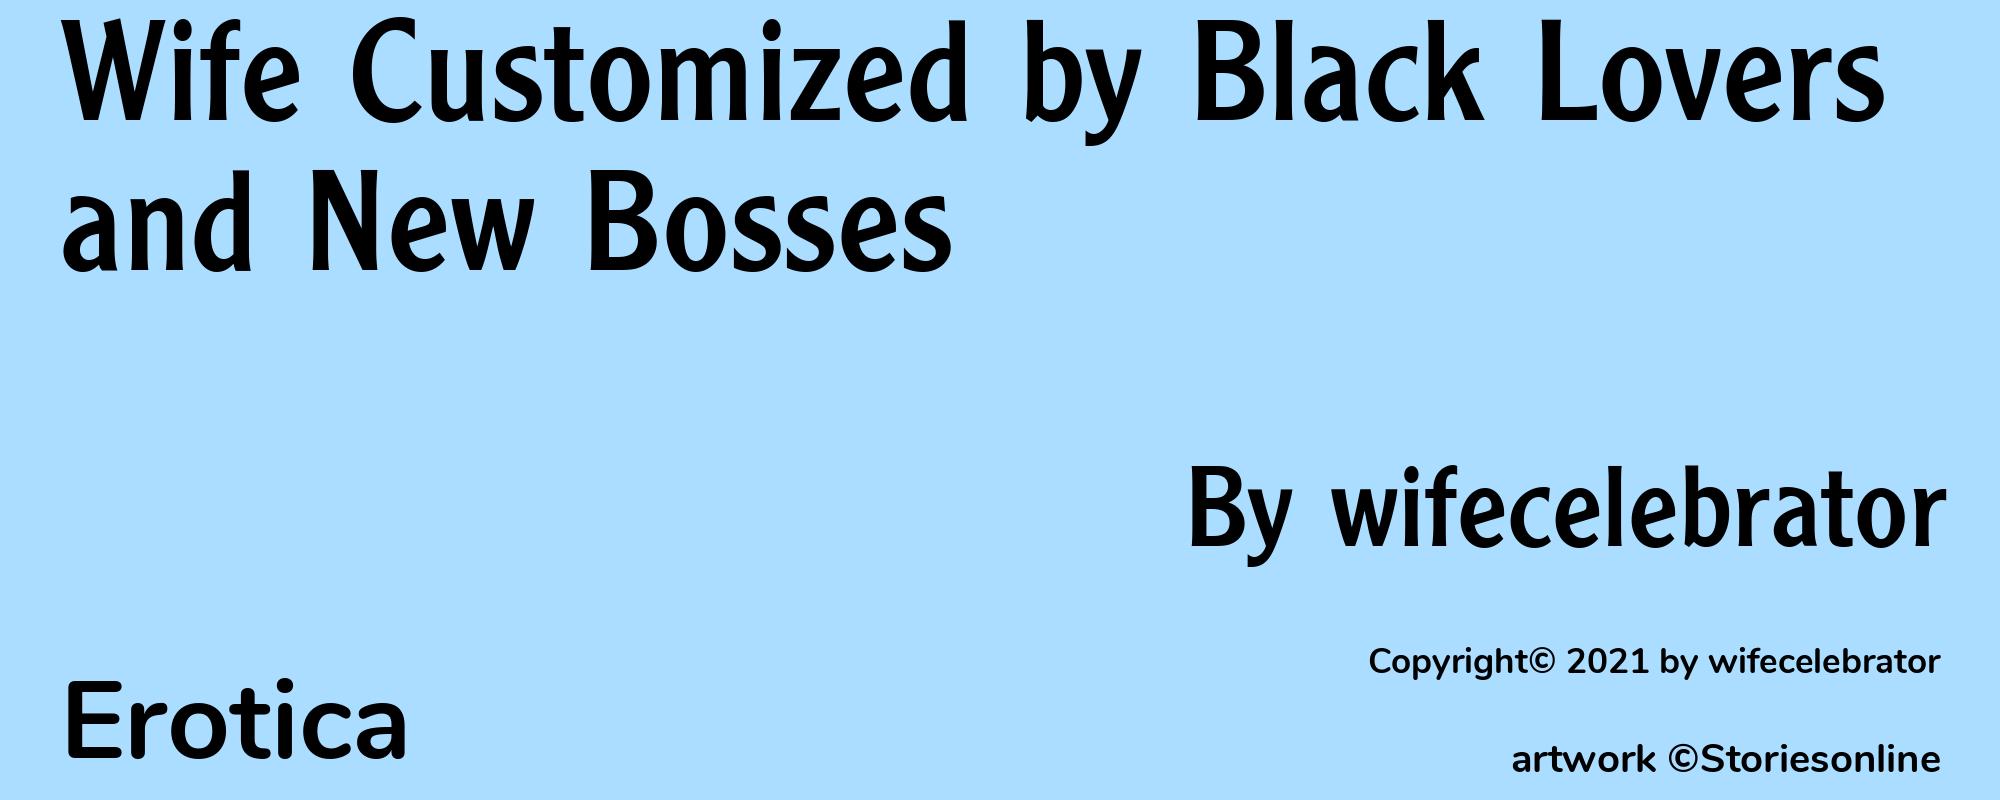 Wife Customized by Black Lovers and New Bosses - Cover